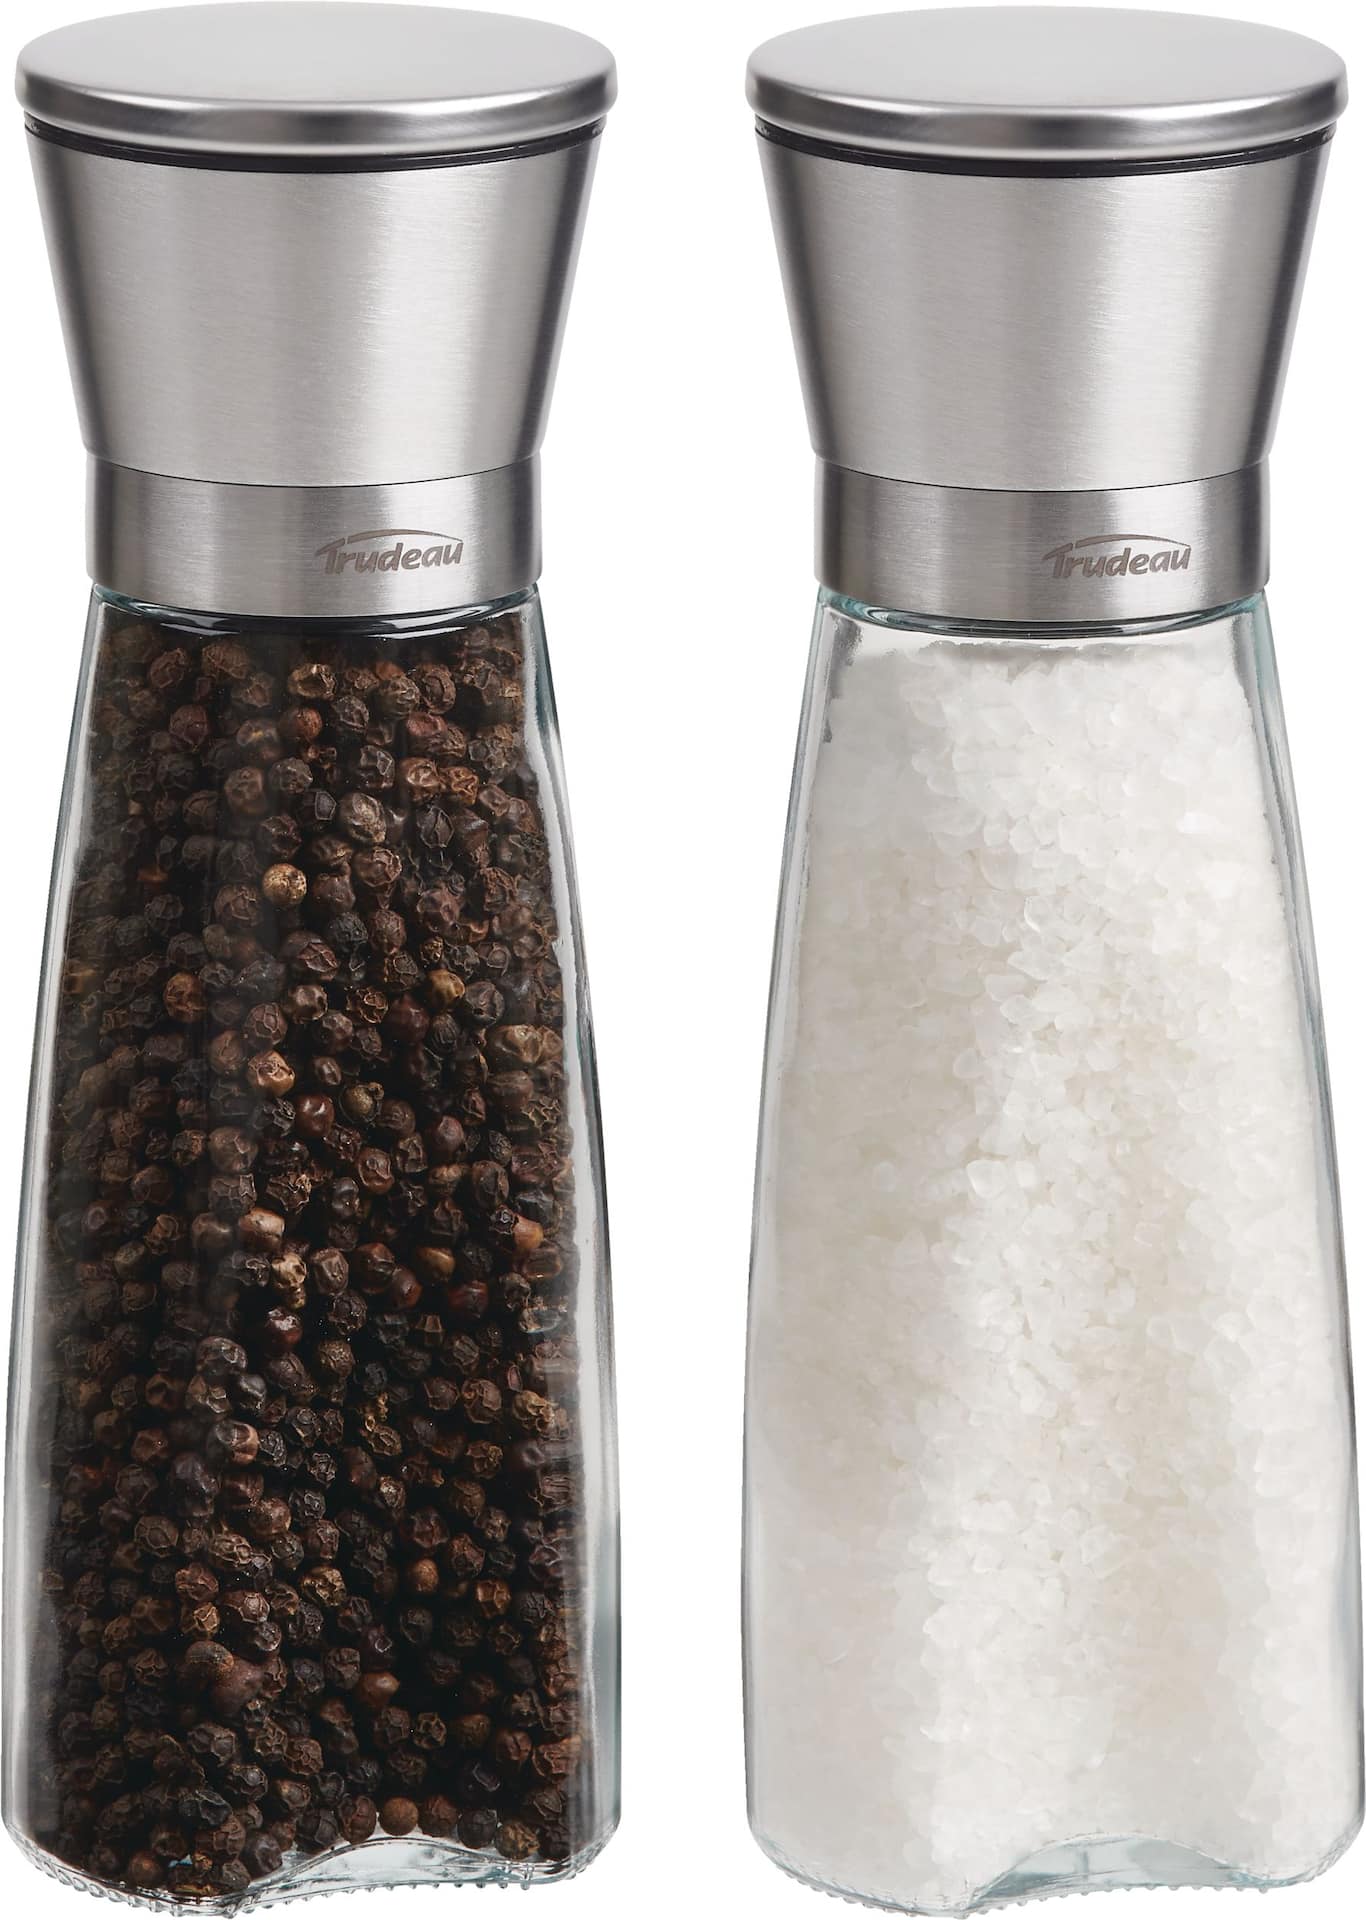 https://media-www.canadiantire.ca/product/living/kitchen/dining-and-entertaining/1424858/trudeau-edge-8-salt-pepper-mill-5ae254d9-c8ae-4081-9c7b-a14e57c028c8-jpgrendition.jpg